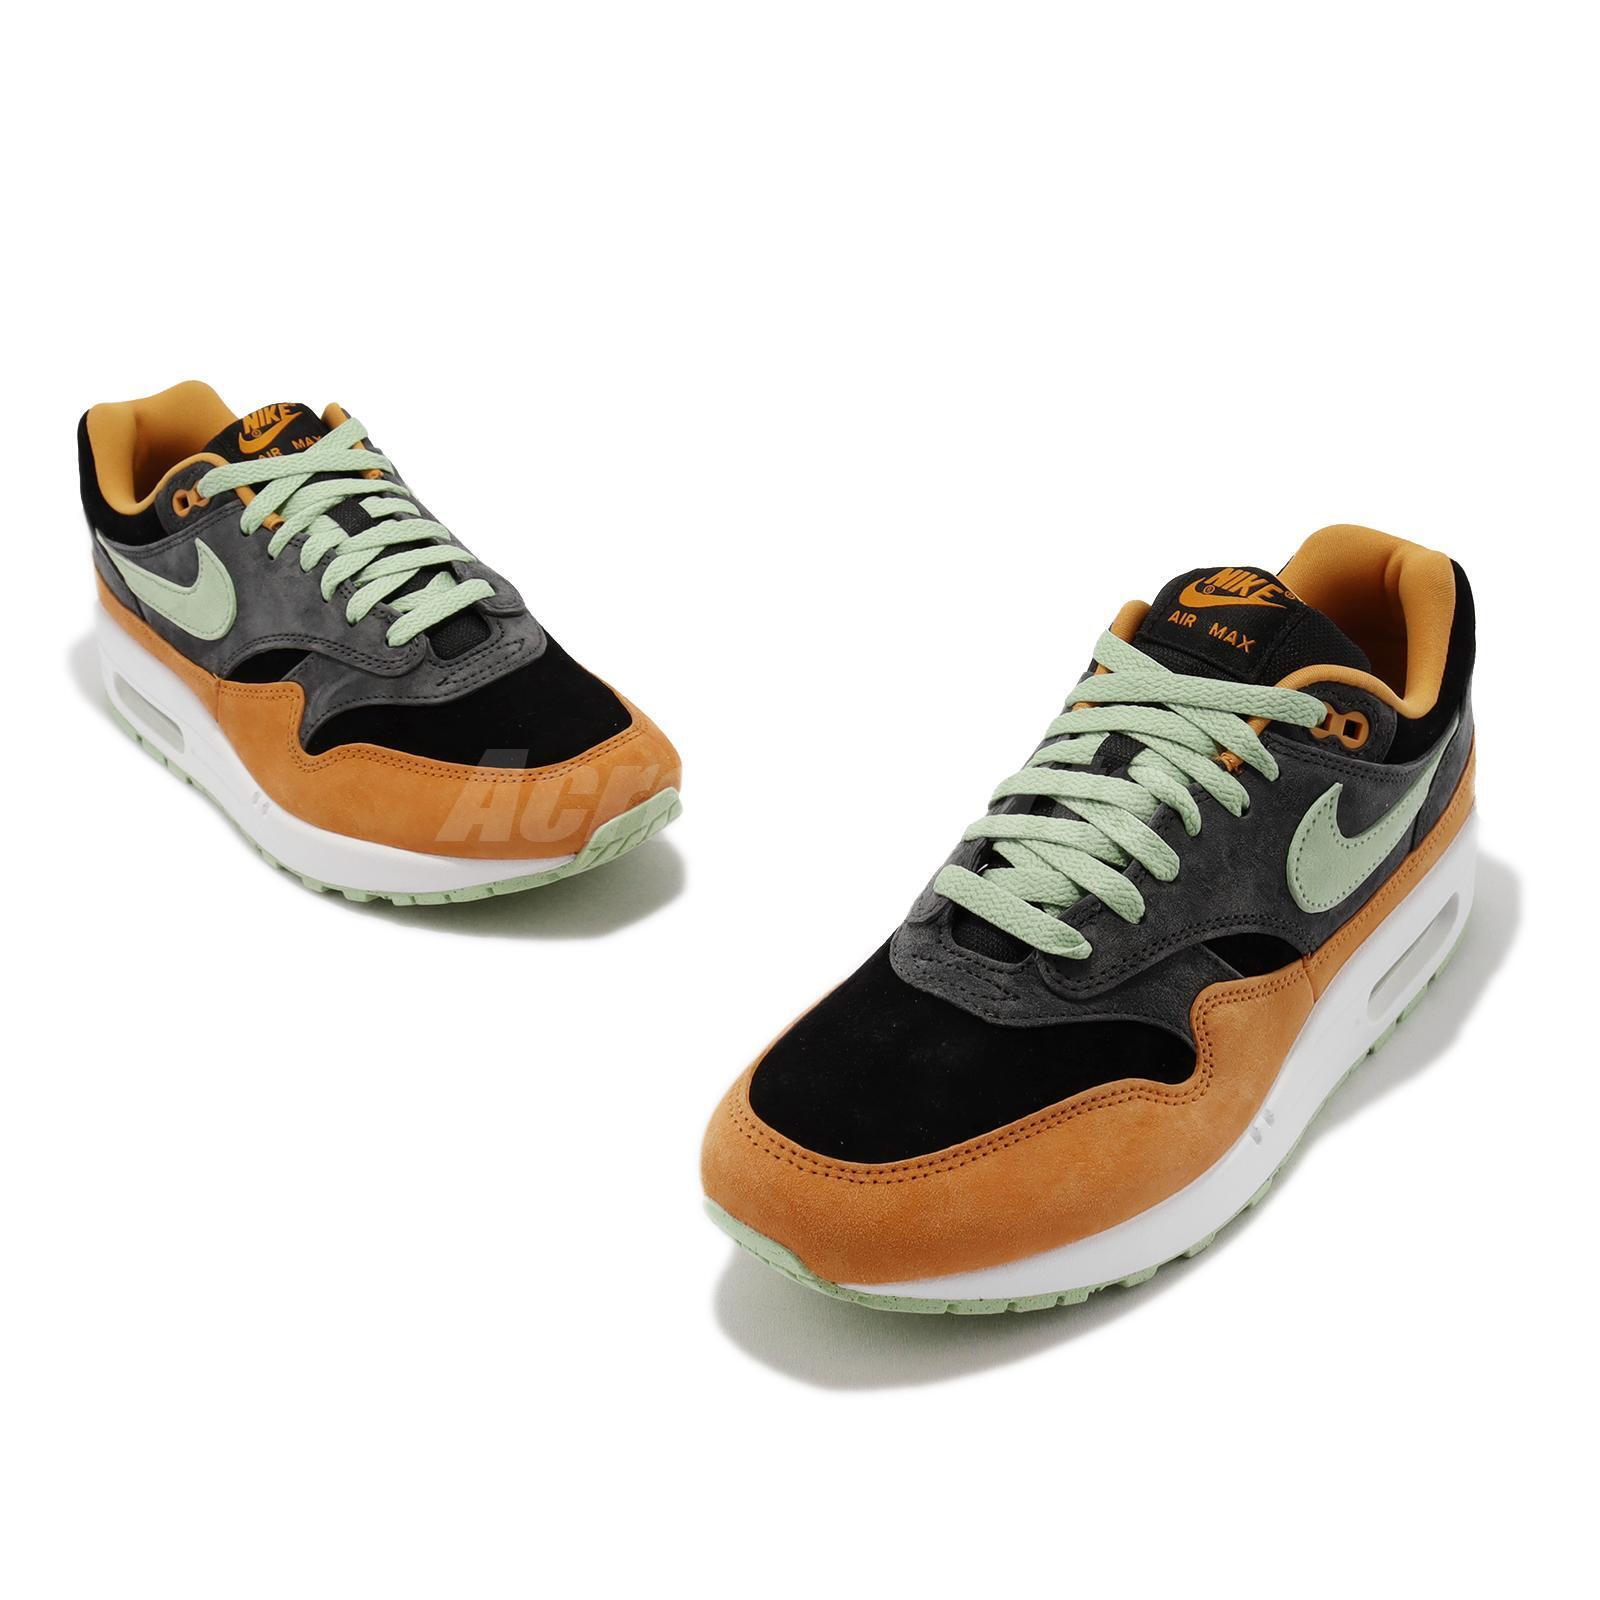 Nike Air Max 1 PRM Ugly Duckling Honeydew Anthracite Men Unisex Shoes  DZ0482-001